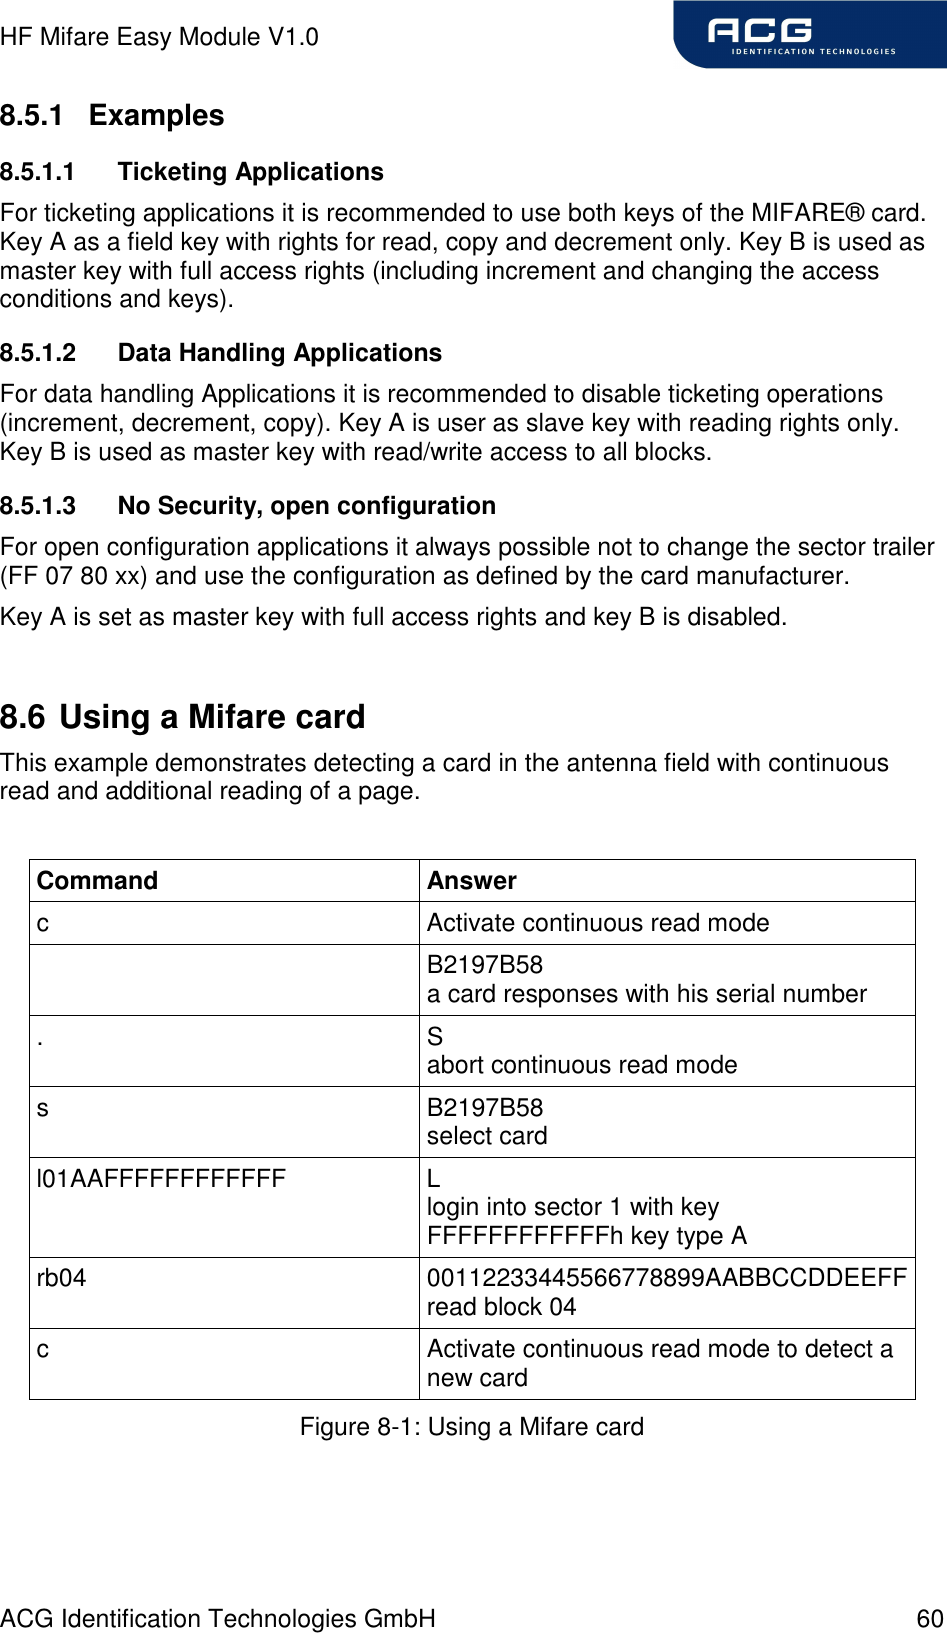 HF Mifare Easy Module V1.0 ACG Identification Technologies GmbH  60 8.5.1  Examples 8.5.1.1  Ticketing Applications For ticketing applications it is recommended to use both keys of the MIFARE® card. Key A as a field key with rights for read, copy and decrement only. Key B is used as master key with full access rights (including increment and changing the access conditions and keys). 8.5.1.2  Data Handling Applications For data handling Applications it is recommended to disable ticketing operations (increment, decrement, copy). Key A is user as slave key with reading rights only. Key B is used as master key with read/write access to all blocks. 8.5.1.3  No Security, open configuration For open configuration applications it always possible not to change the sector trailer (FF 07 80 xx) and use the configuration as defined by the card manufacturer. Key A is set as master key with full access rights and key B is disabled.  8.6 Using a Mifare card This example demonstrates detecting a card in the antenna field with continuous read and additional reading of a page.  Command  Answer c  Activate continuous read mode   B2197B58 a card responses with his serial number .  S abort continuous read mode s  B2197B58 select card l01AAFFFFFFFFFFFF  L login into sector 1 with key FFFFFFFFFFFFh key type A rb04  00112233445566778899AABBCCDDEEFF read block 04 c  Activate continuous read mode to detect a new card Figure 8-1: Using a Mifare card  